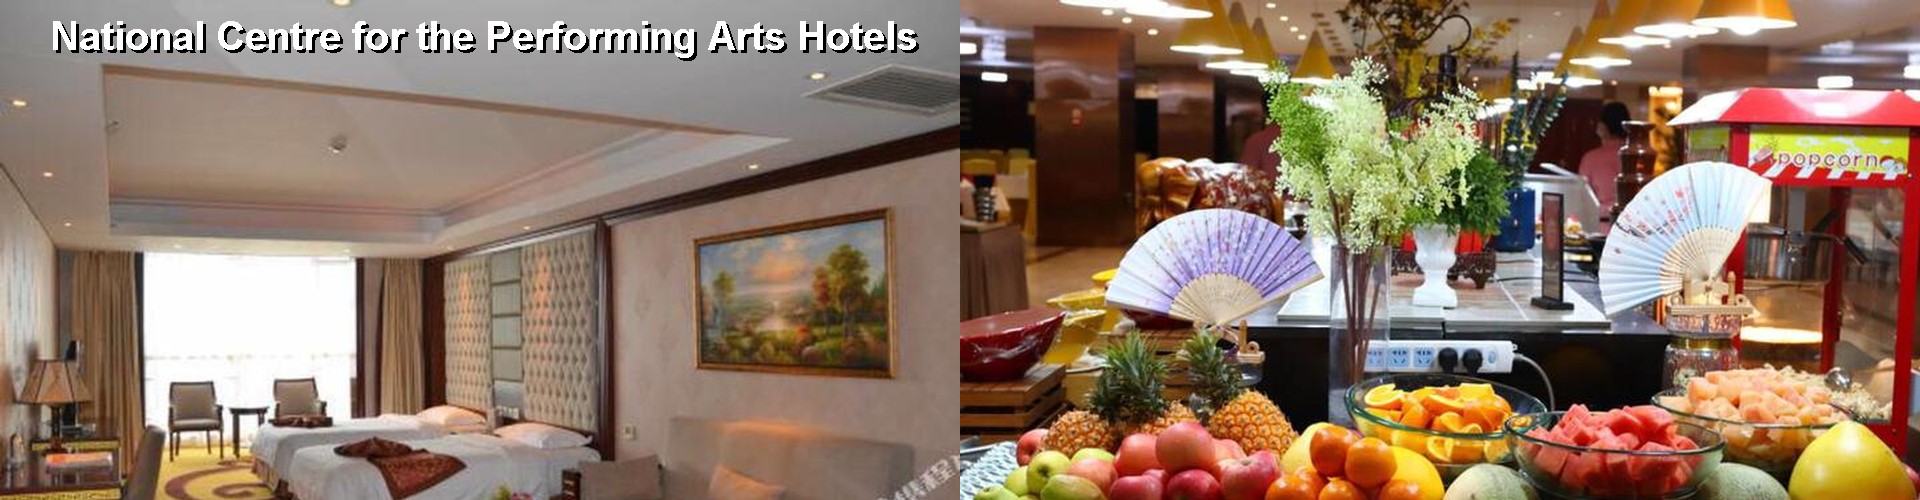 2 Best Hotels near National Centre for the Performing Arts